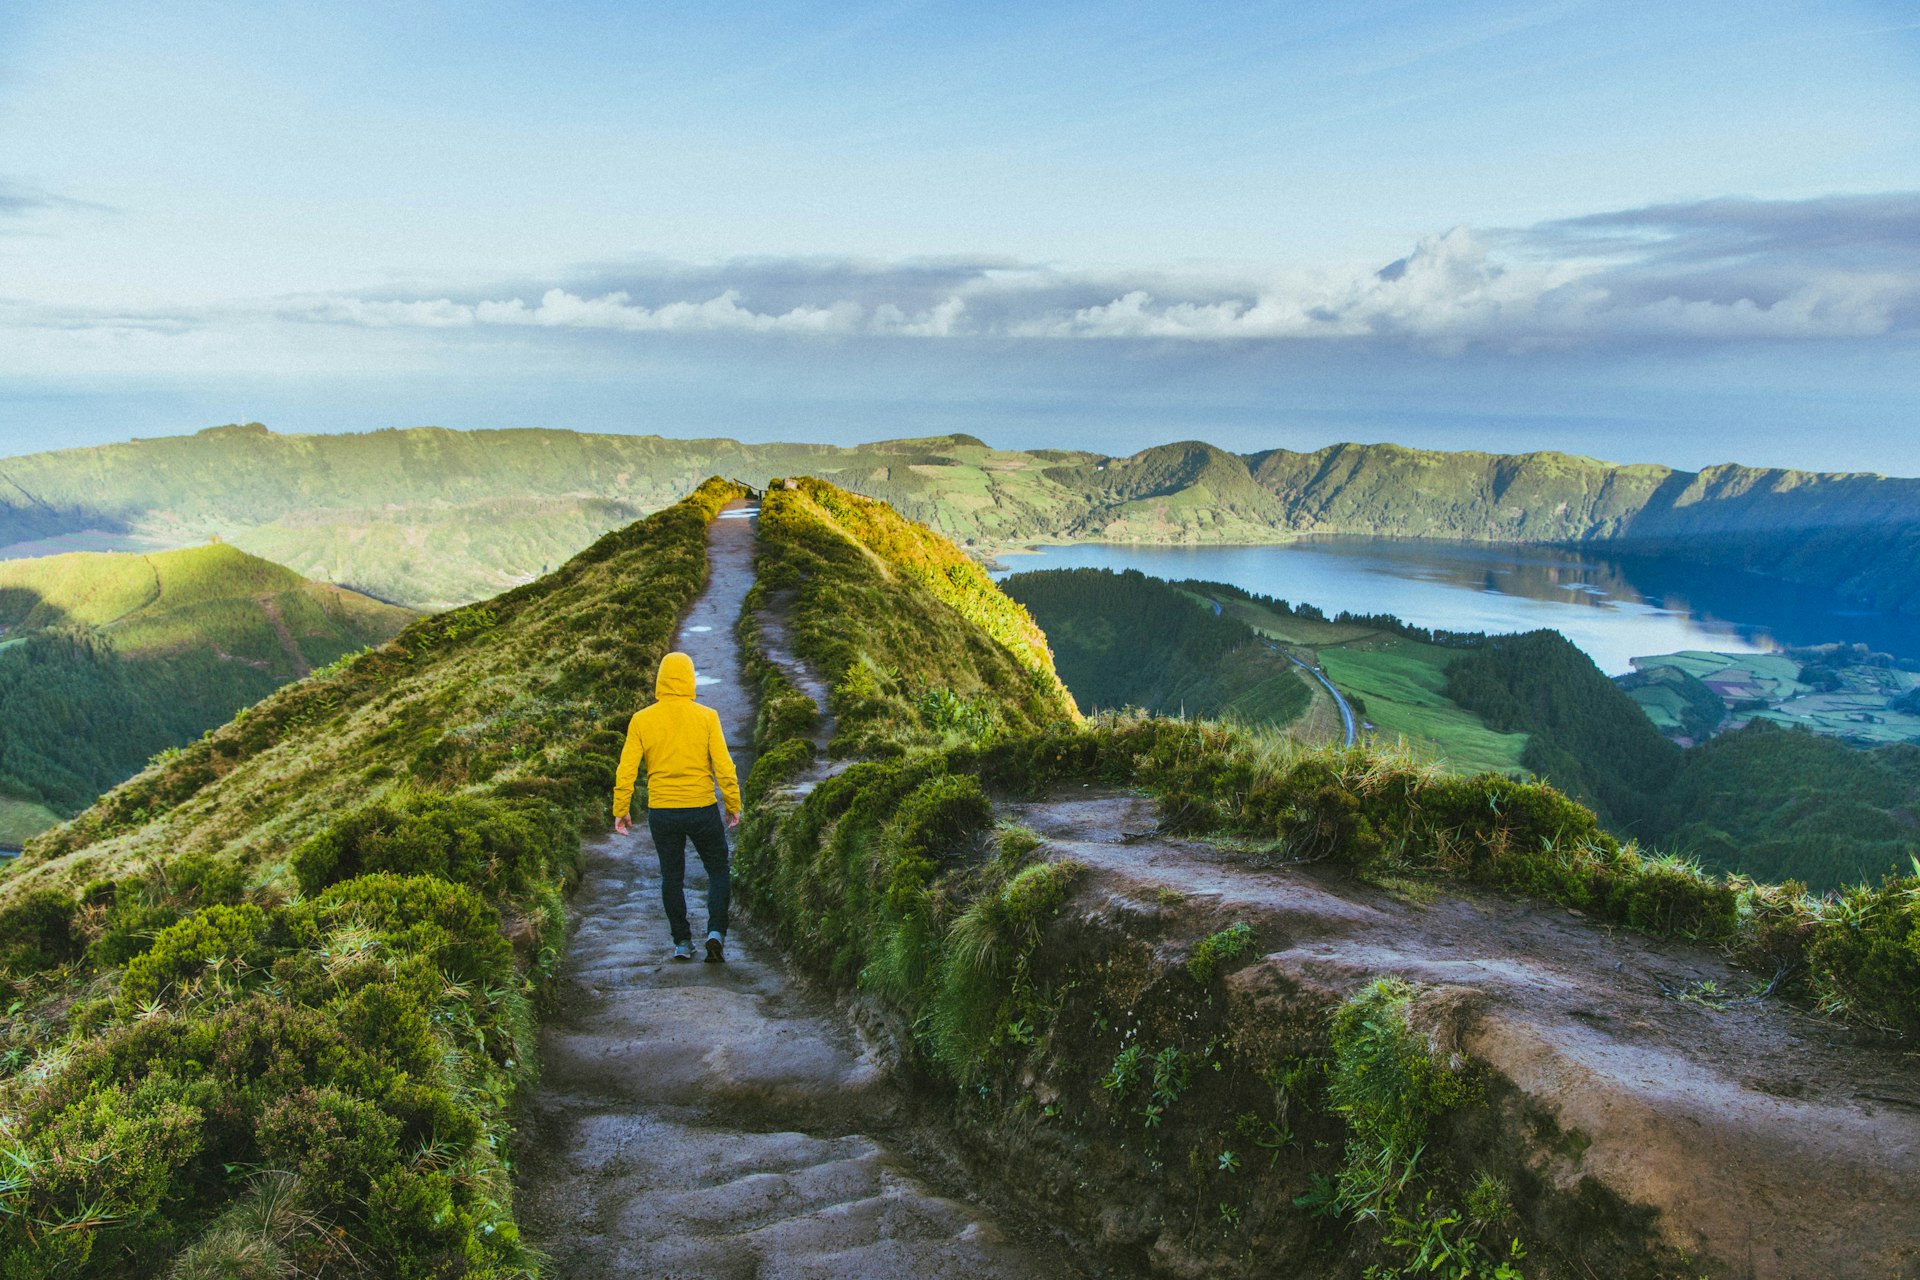 A person in a yellow rain jacket walks down a path between two craters filled with lagoons